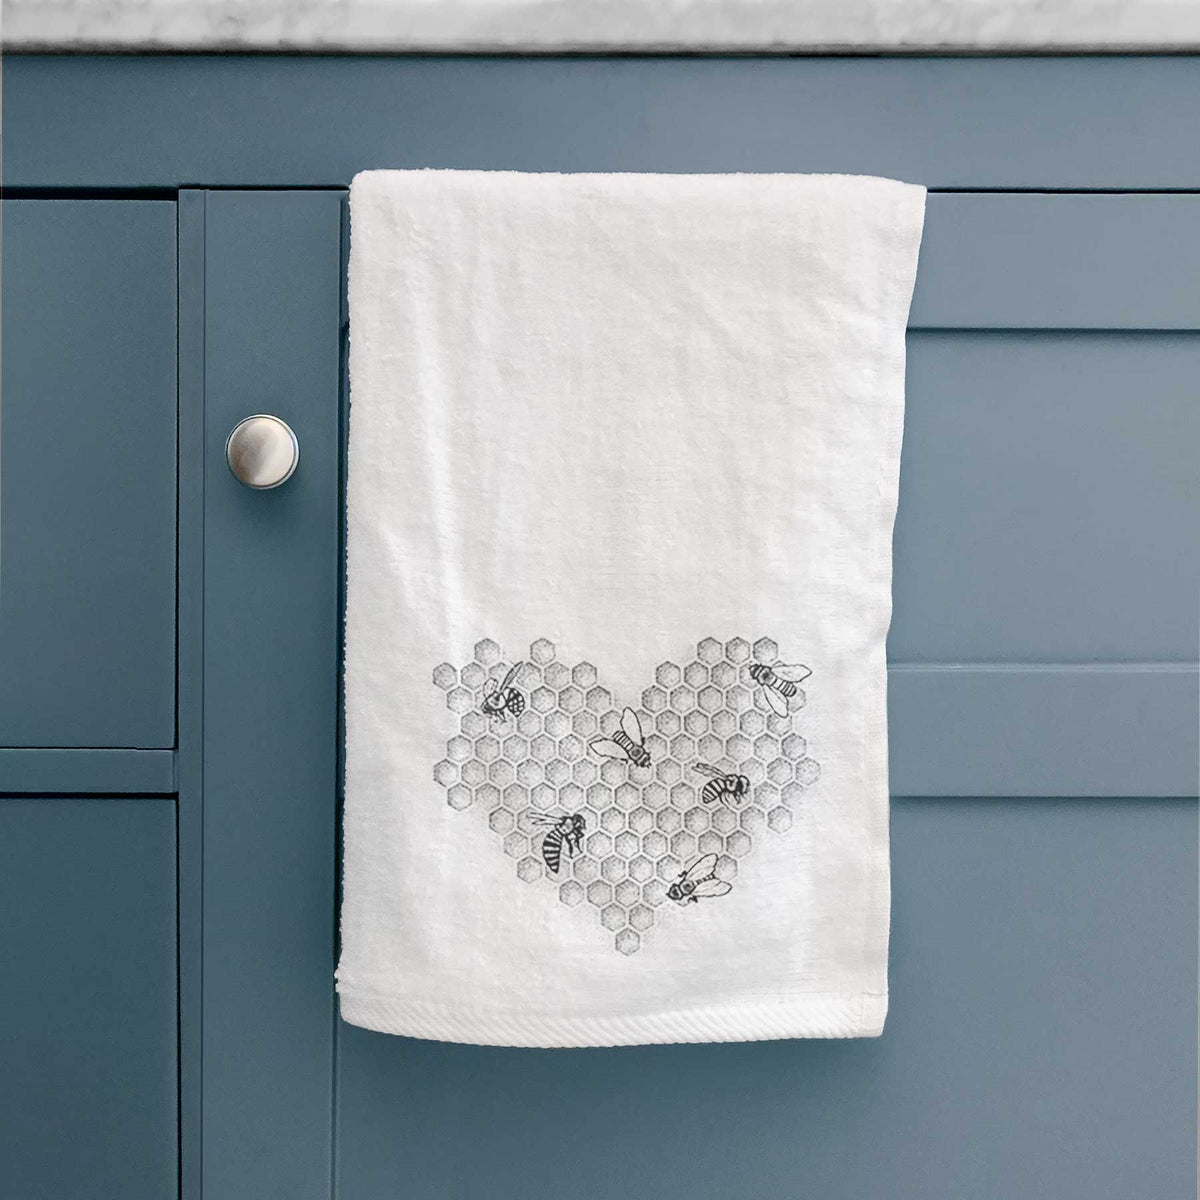 Honeycomb Heart with Bees Hand Towel